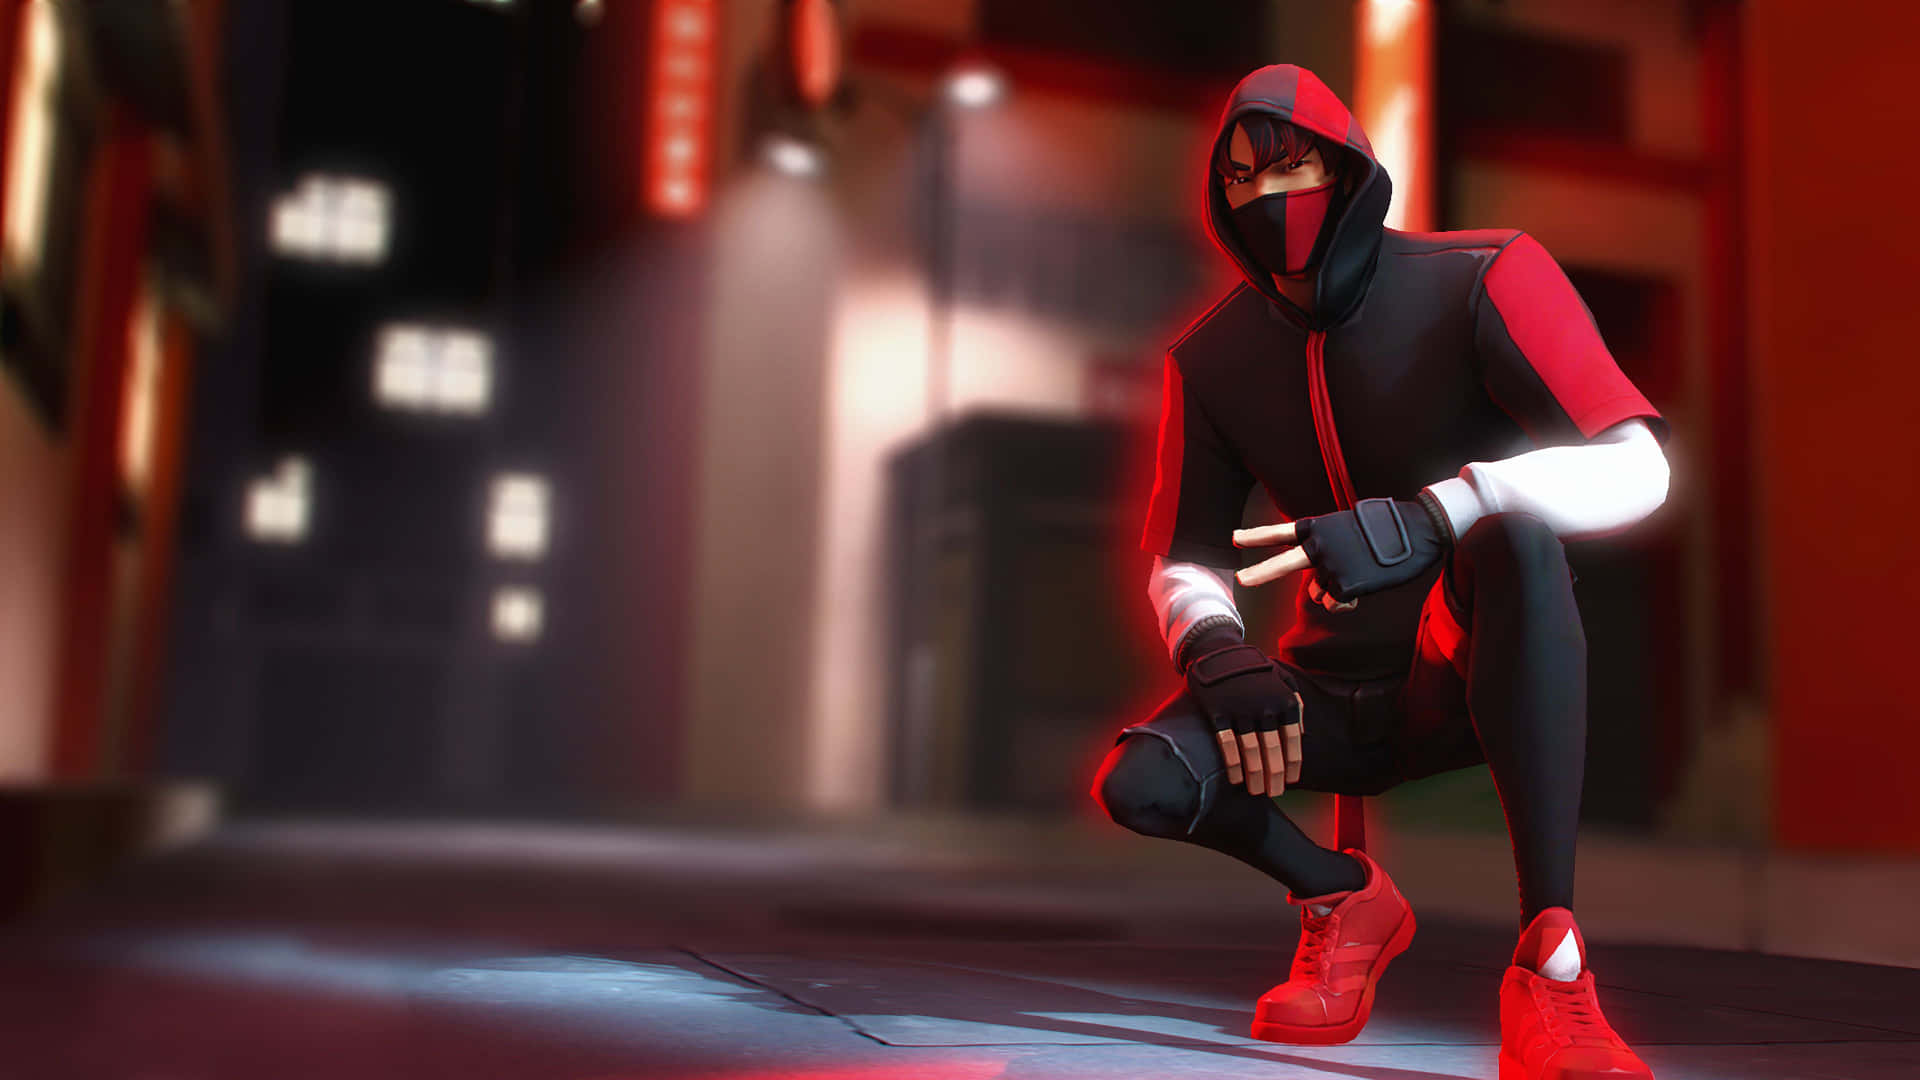 Get ready to dominate the Battle Royale with Fortnite Ikonik Skin! Wallpaper